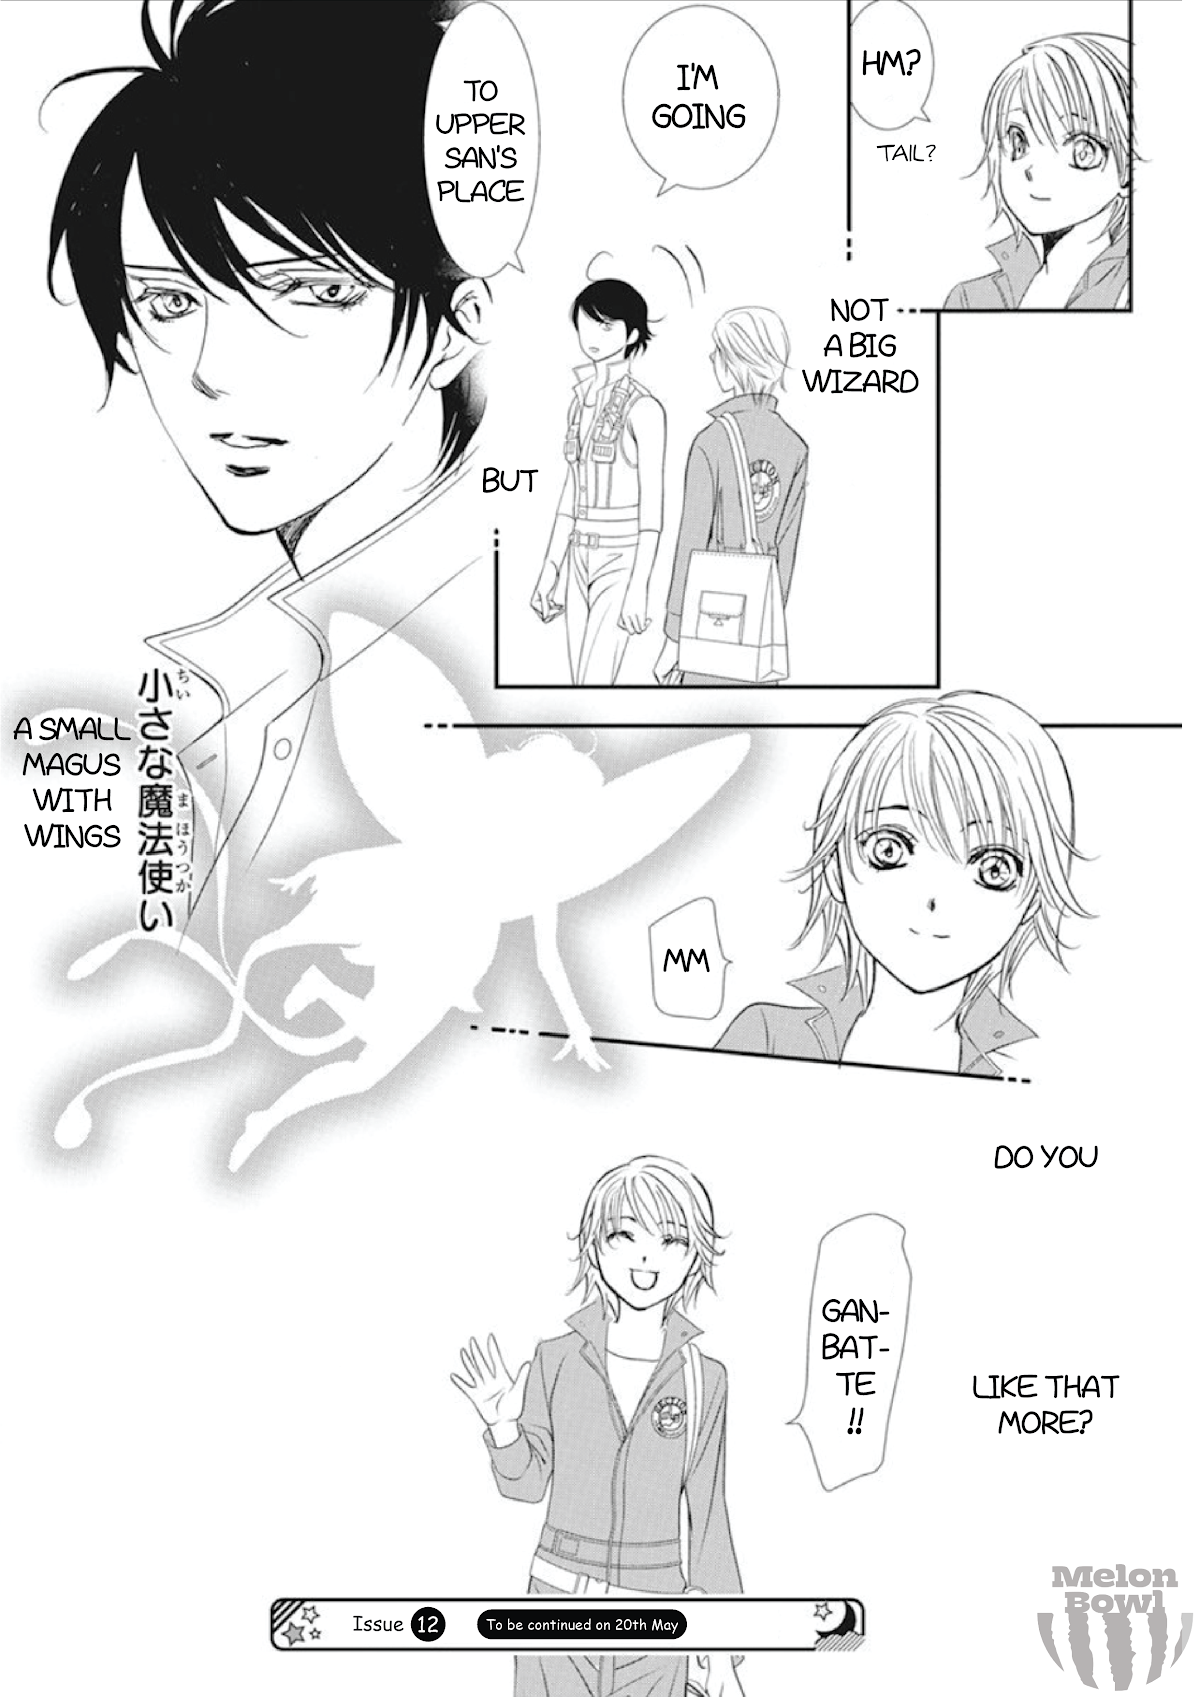 Skip Beat!, Chapter 305 Fairytale Dialogue image 19